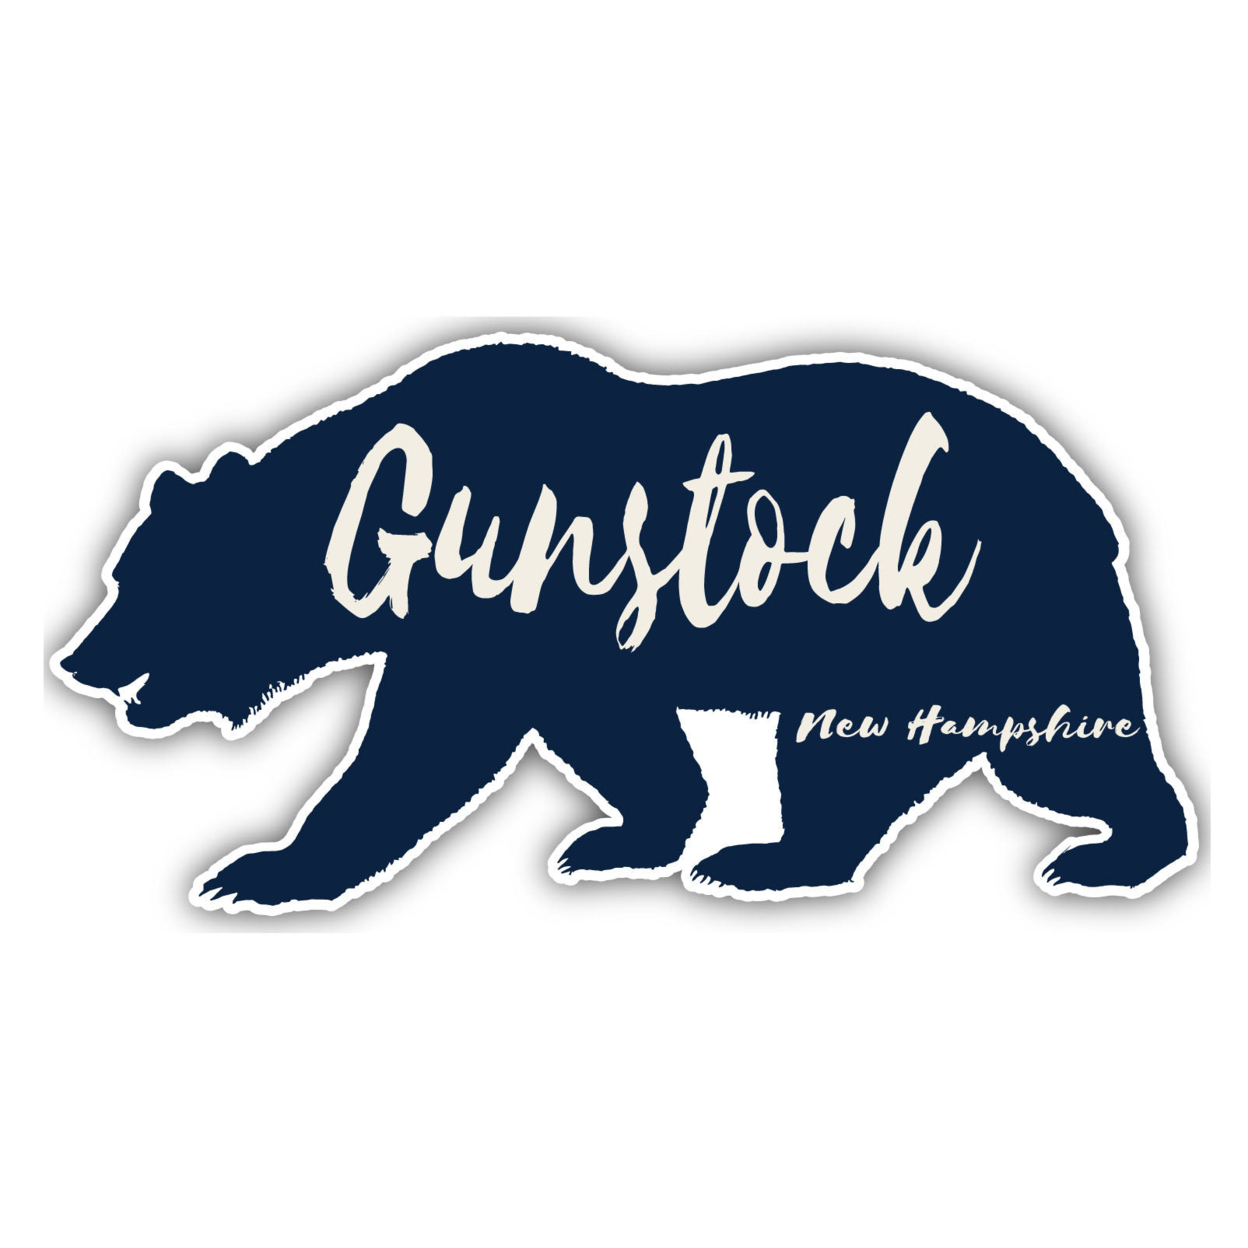 Gunstock New Hampshire Souvenir Decorative Stickers (Choose Theme And Size) - 4-Pack, 10-Inch, Bear